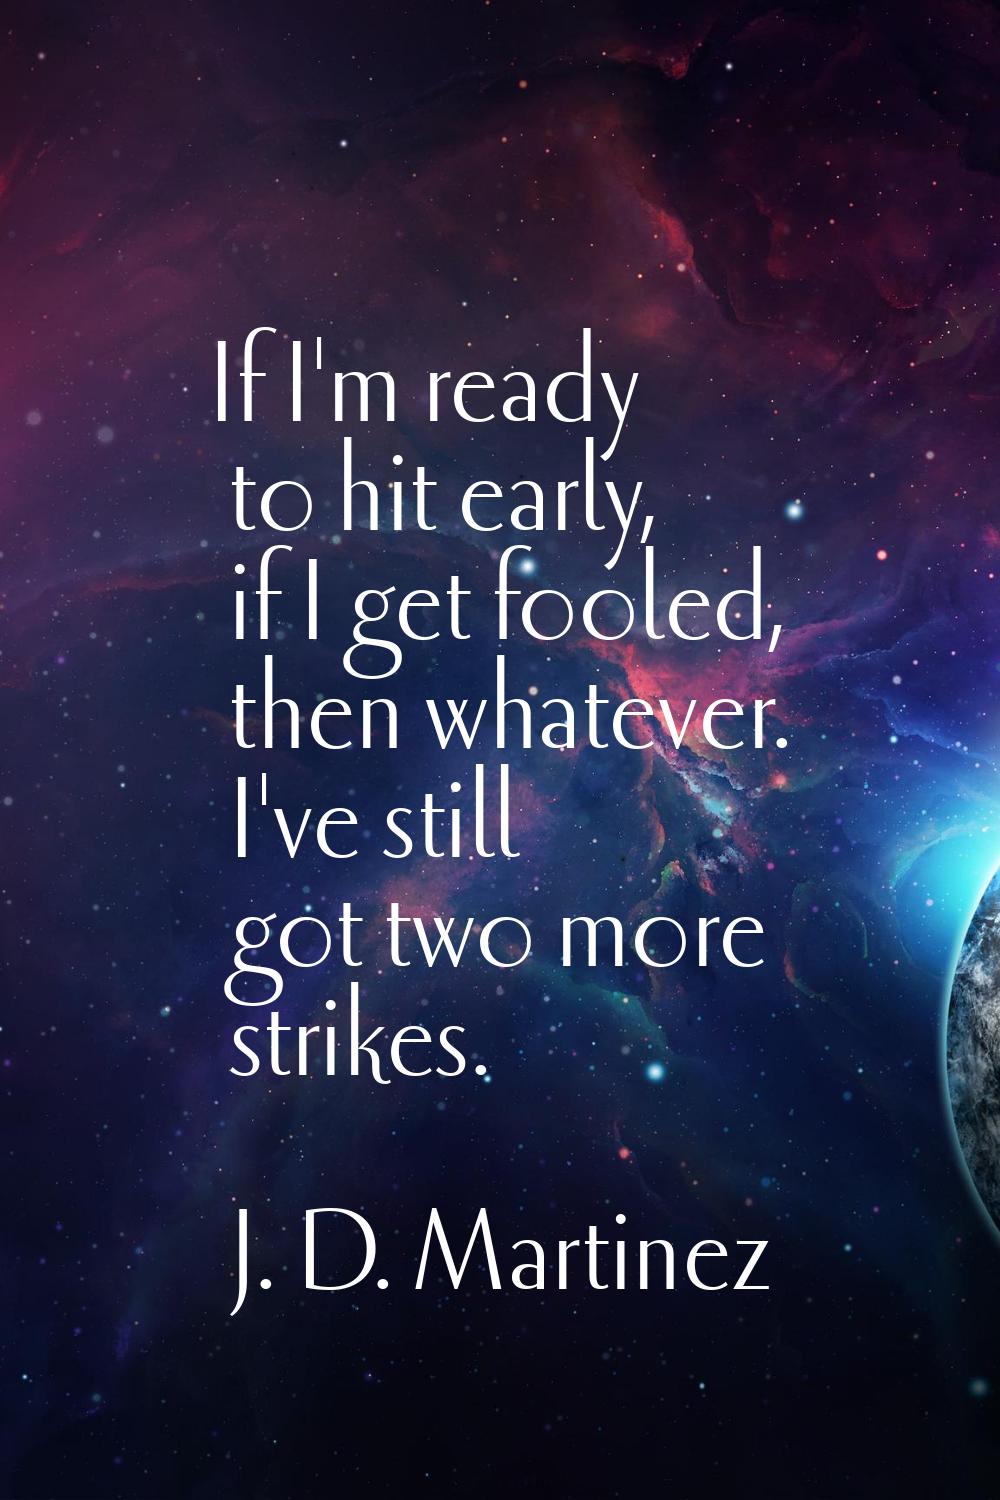 If I'm ready to hit early, if I get fooled, then whatever. I've still got two more strikes.